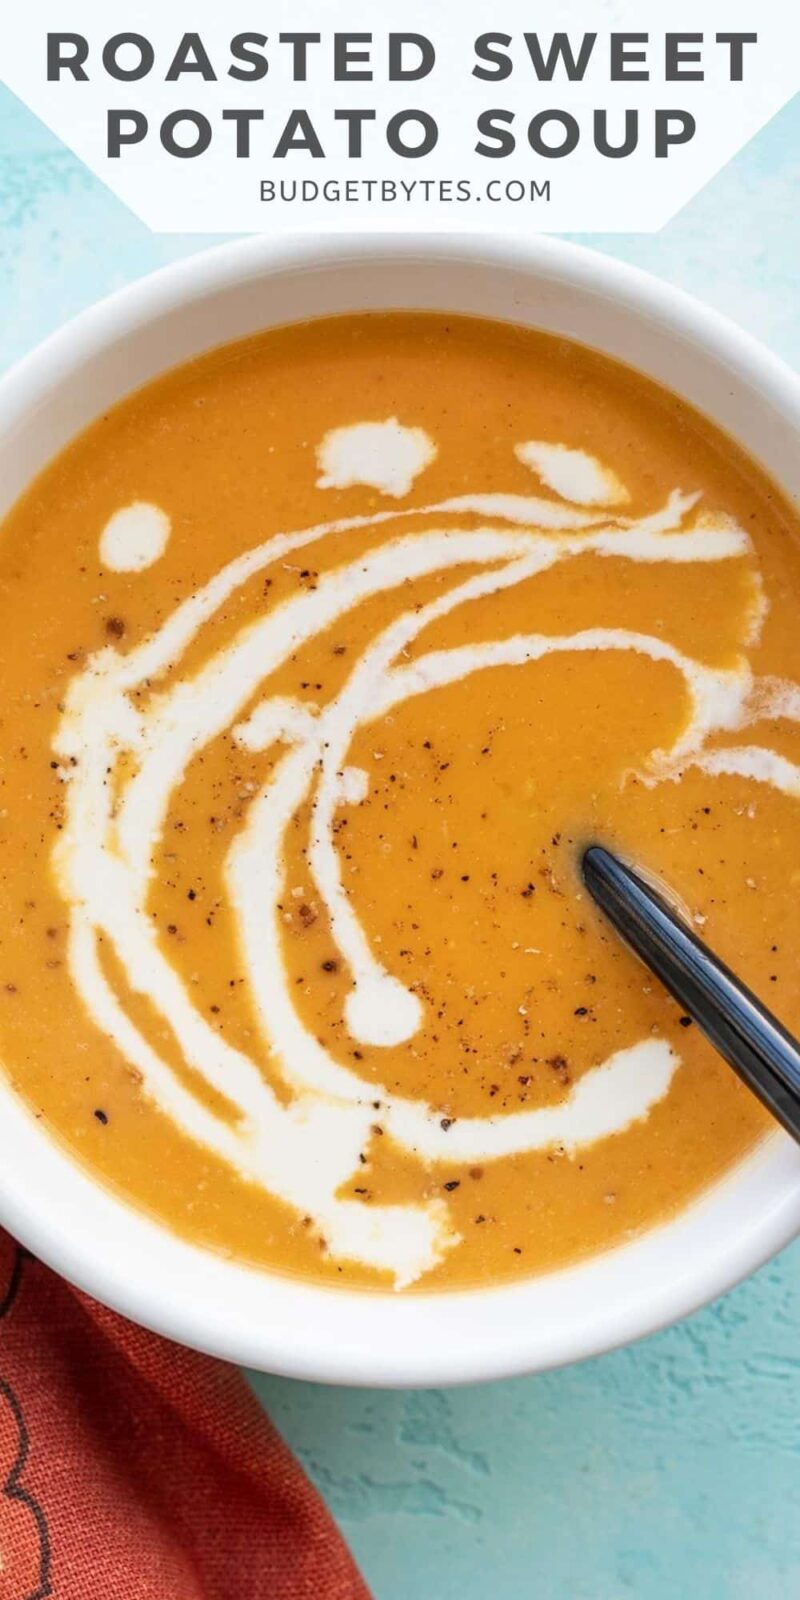 Overhead view of a bowl of creamy sweet potato soup with title text at the top